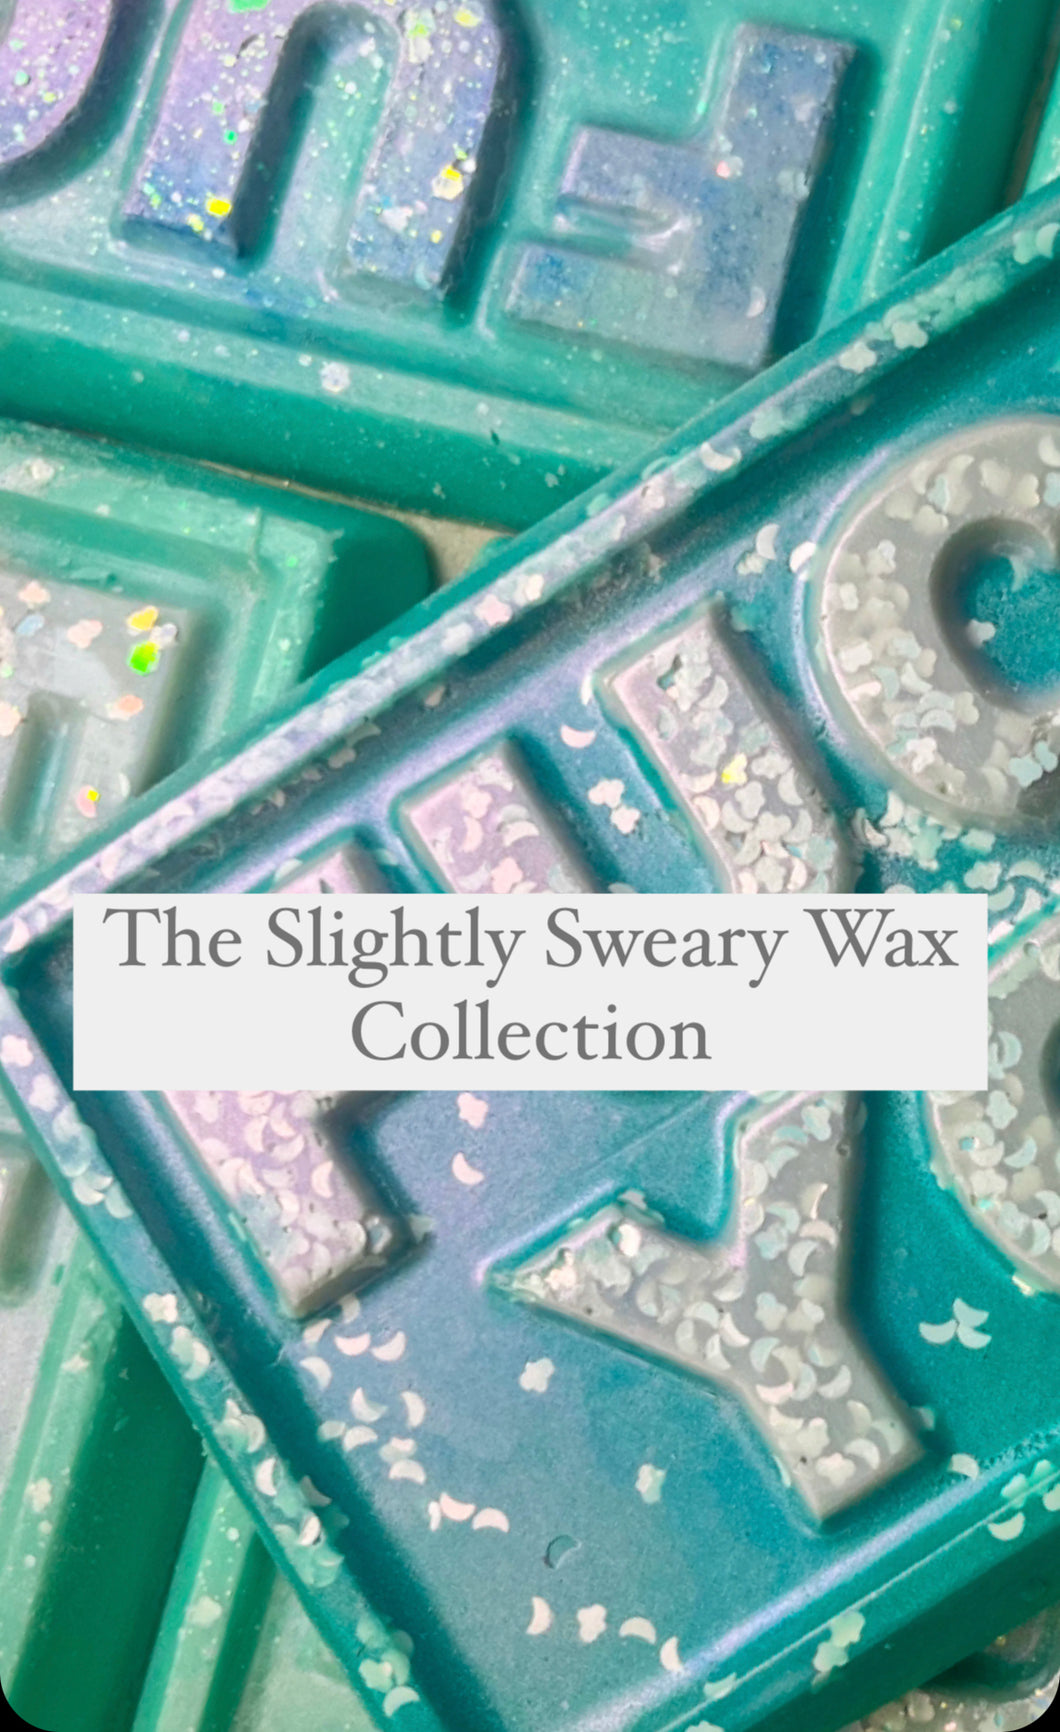 The Slightly Sweary Wax Collection